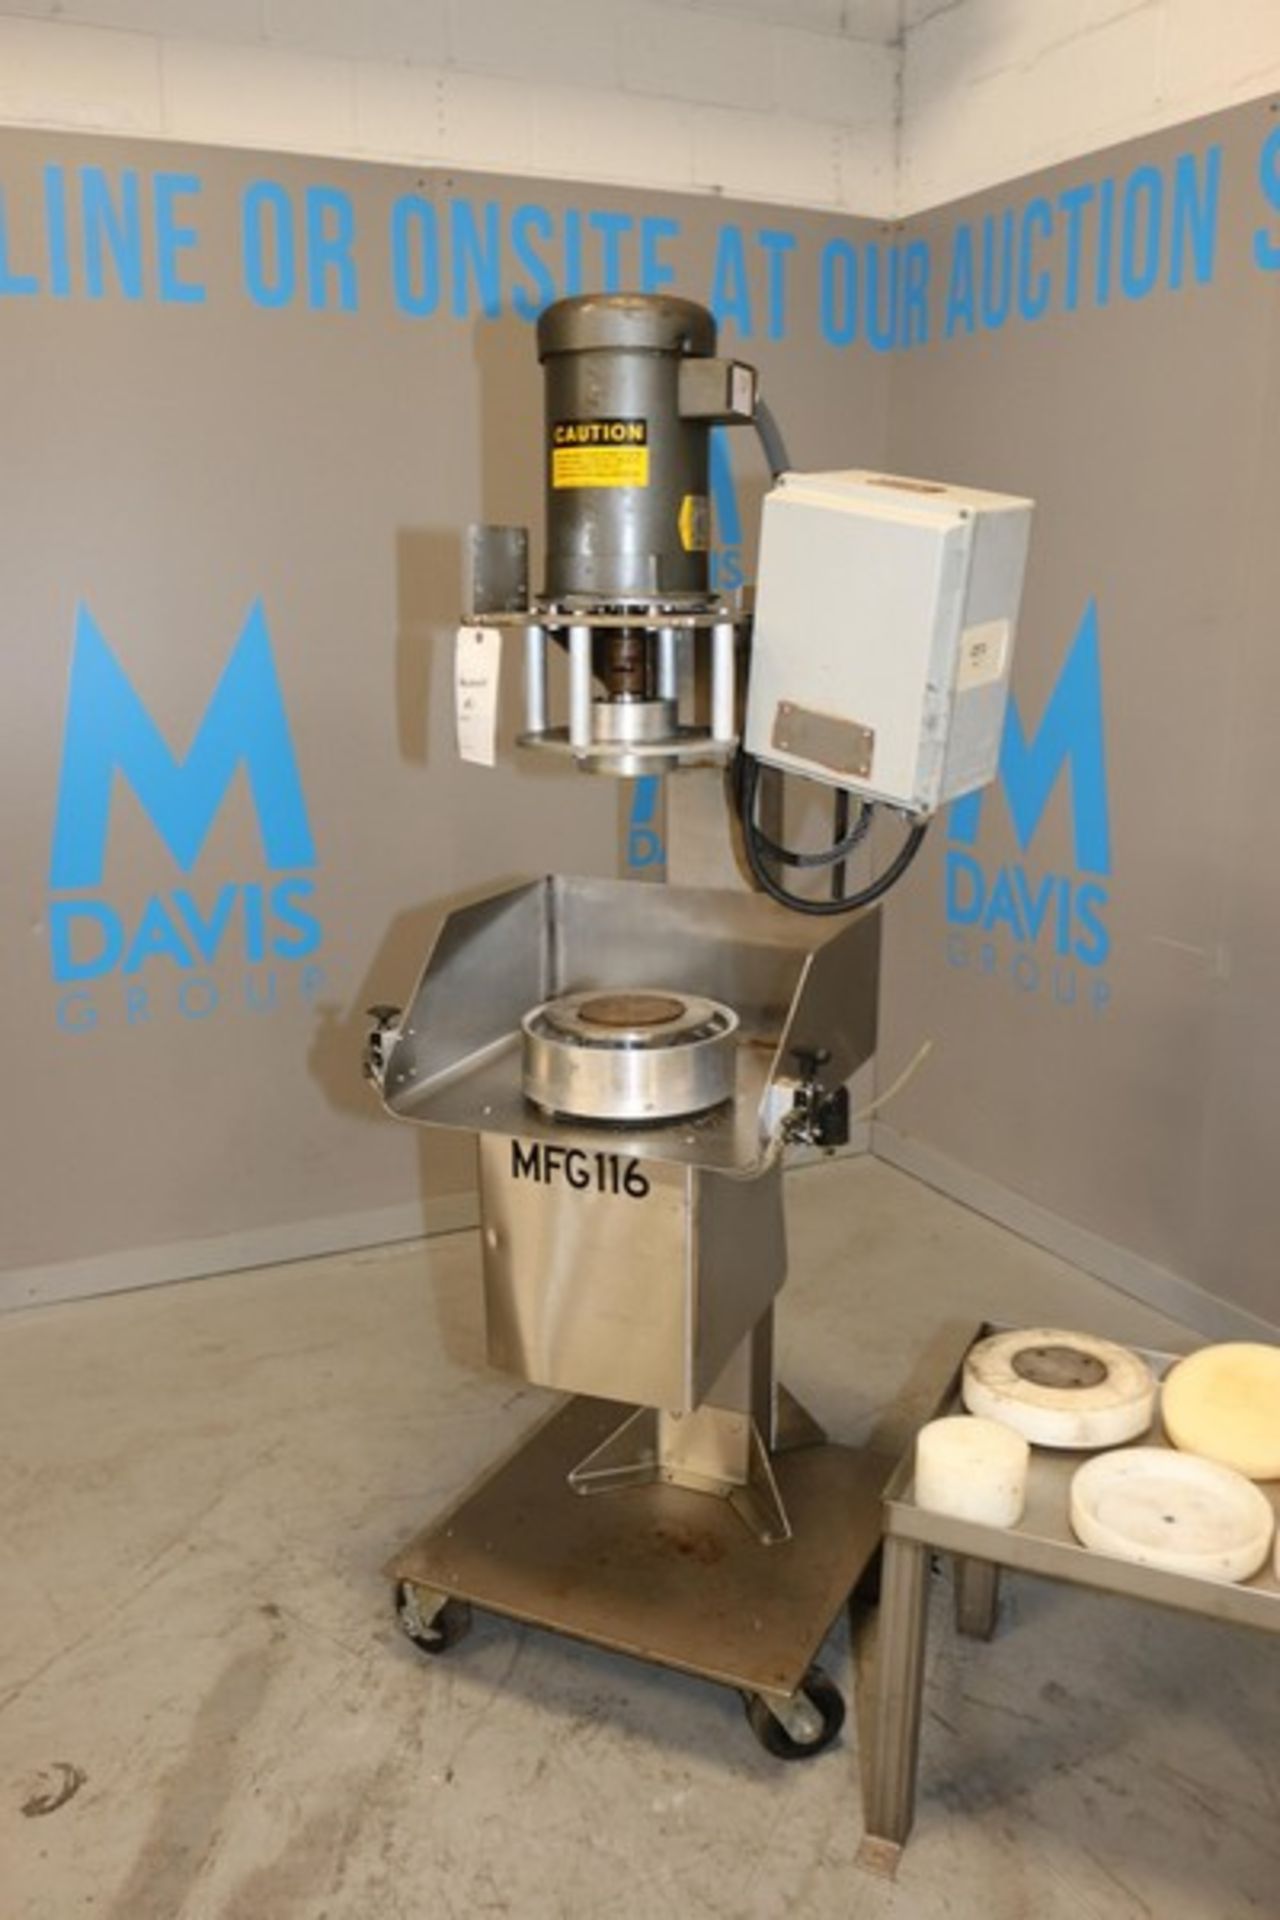 Colborne Dough Press, M/N EGS, S/N 399 92, 208V, 3 Phase, with Baldor 5 hp Motor, 1725 RPM, - Image 3 of 9